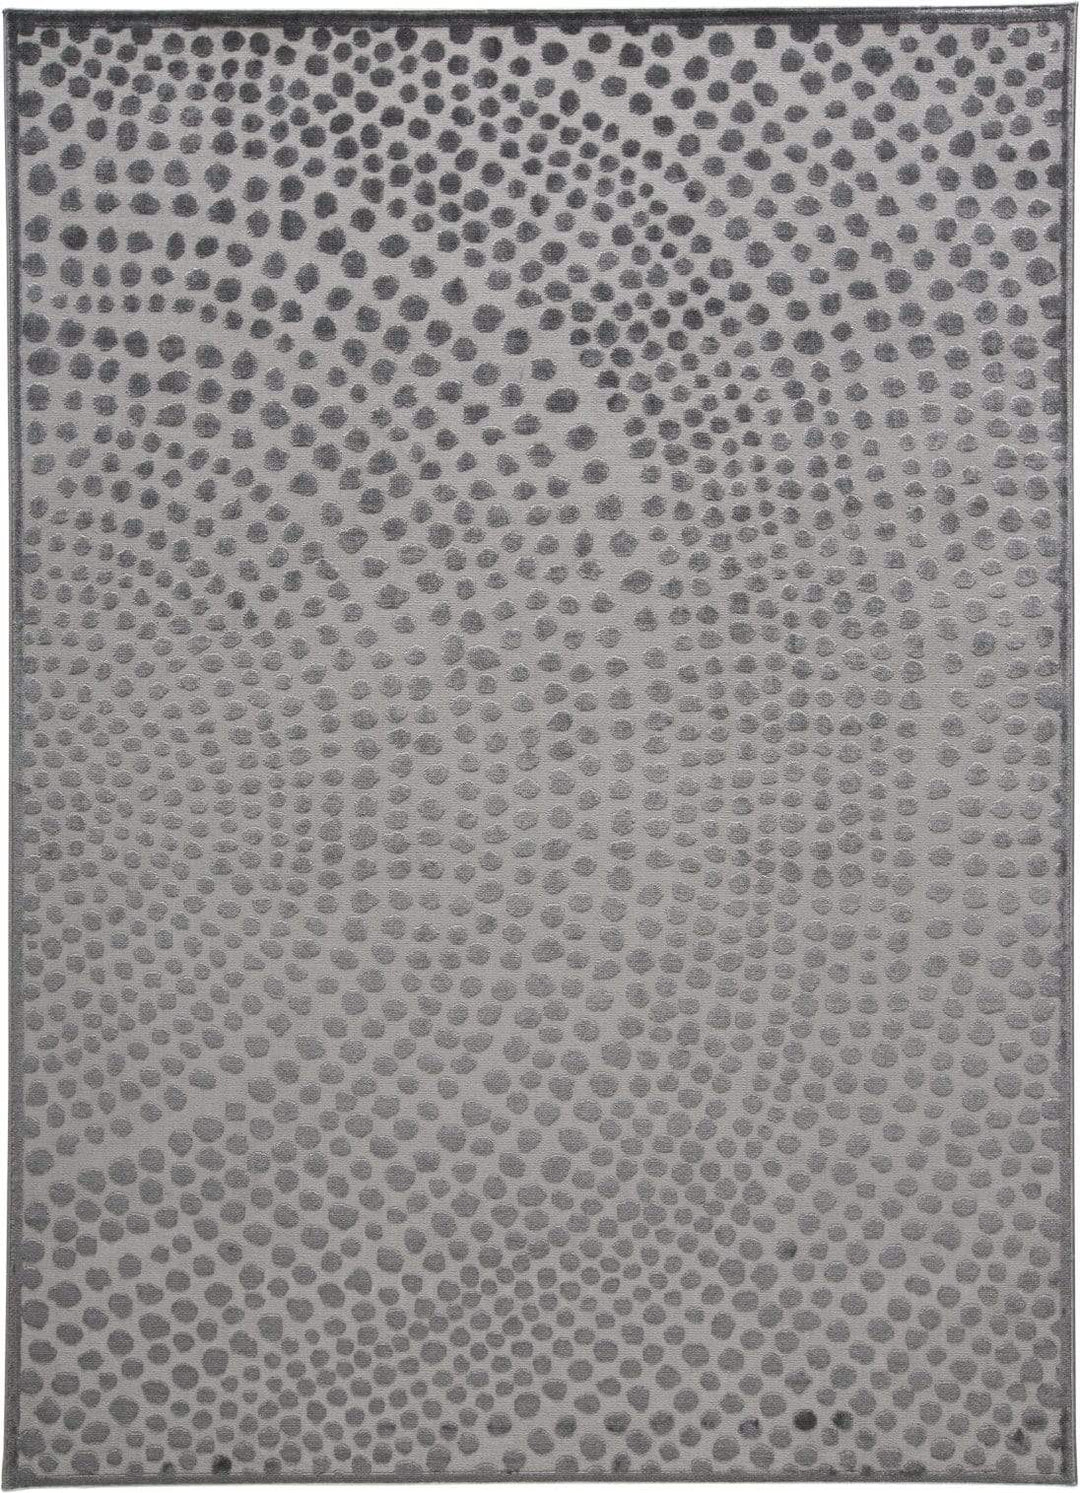 Feizy Feizy Gaspar Modern Dotted Texture Rug - Dark Silver Gray - Available in 6 Sizes 5'-2" x 7'-2" 7873835FCASDGYE80